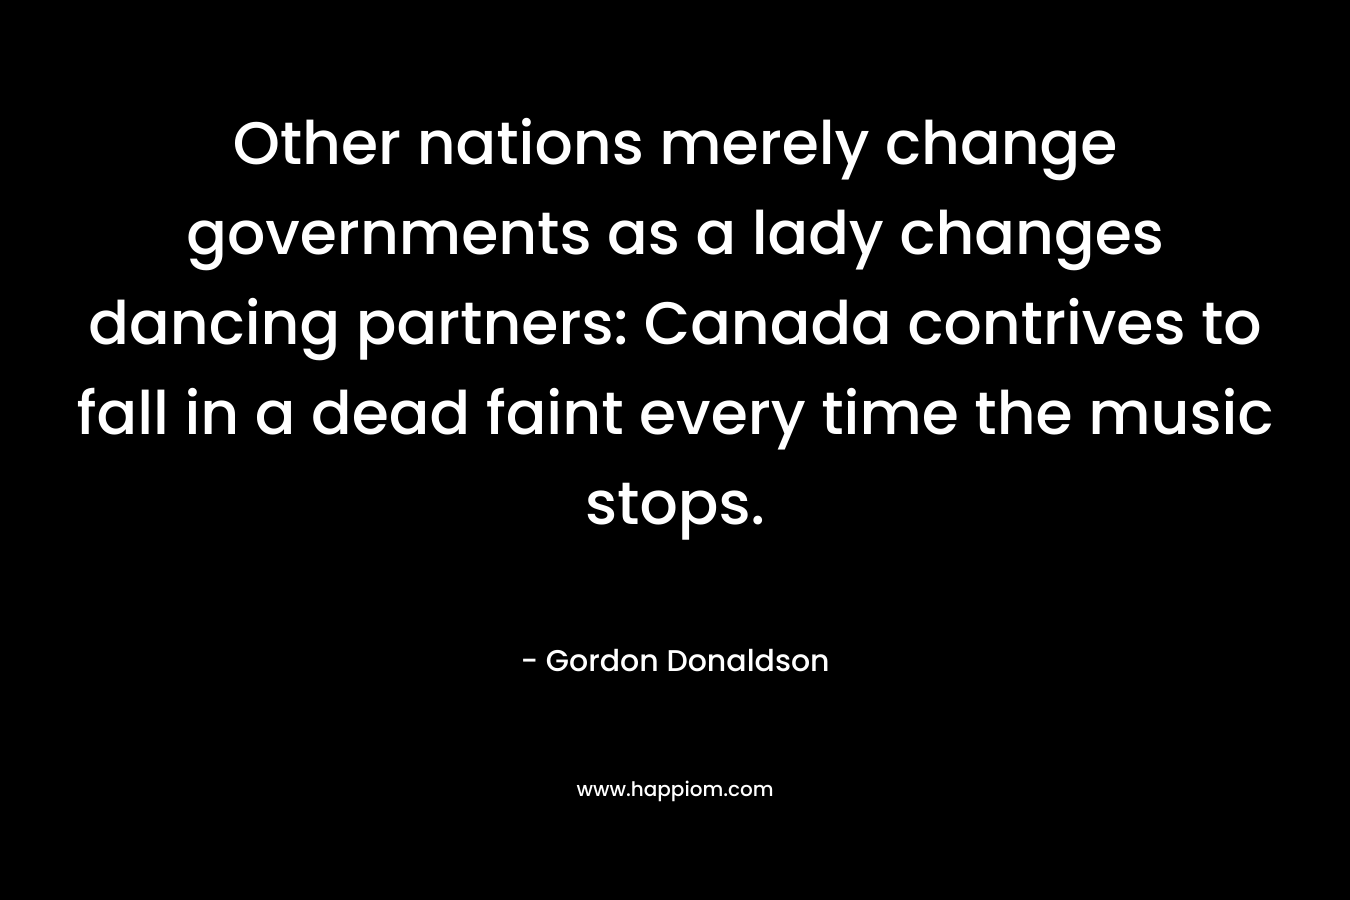 Other nations merely change governments as a lady changes dancing partners: Canada contrives to fall in a dead faint every time the music stops.